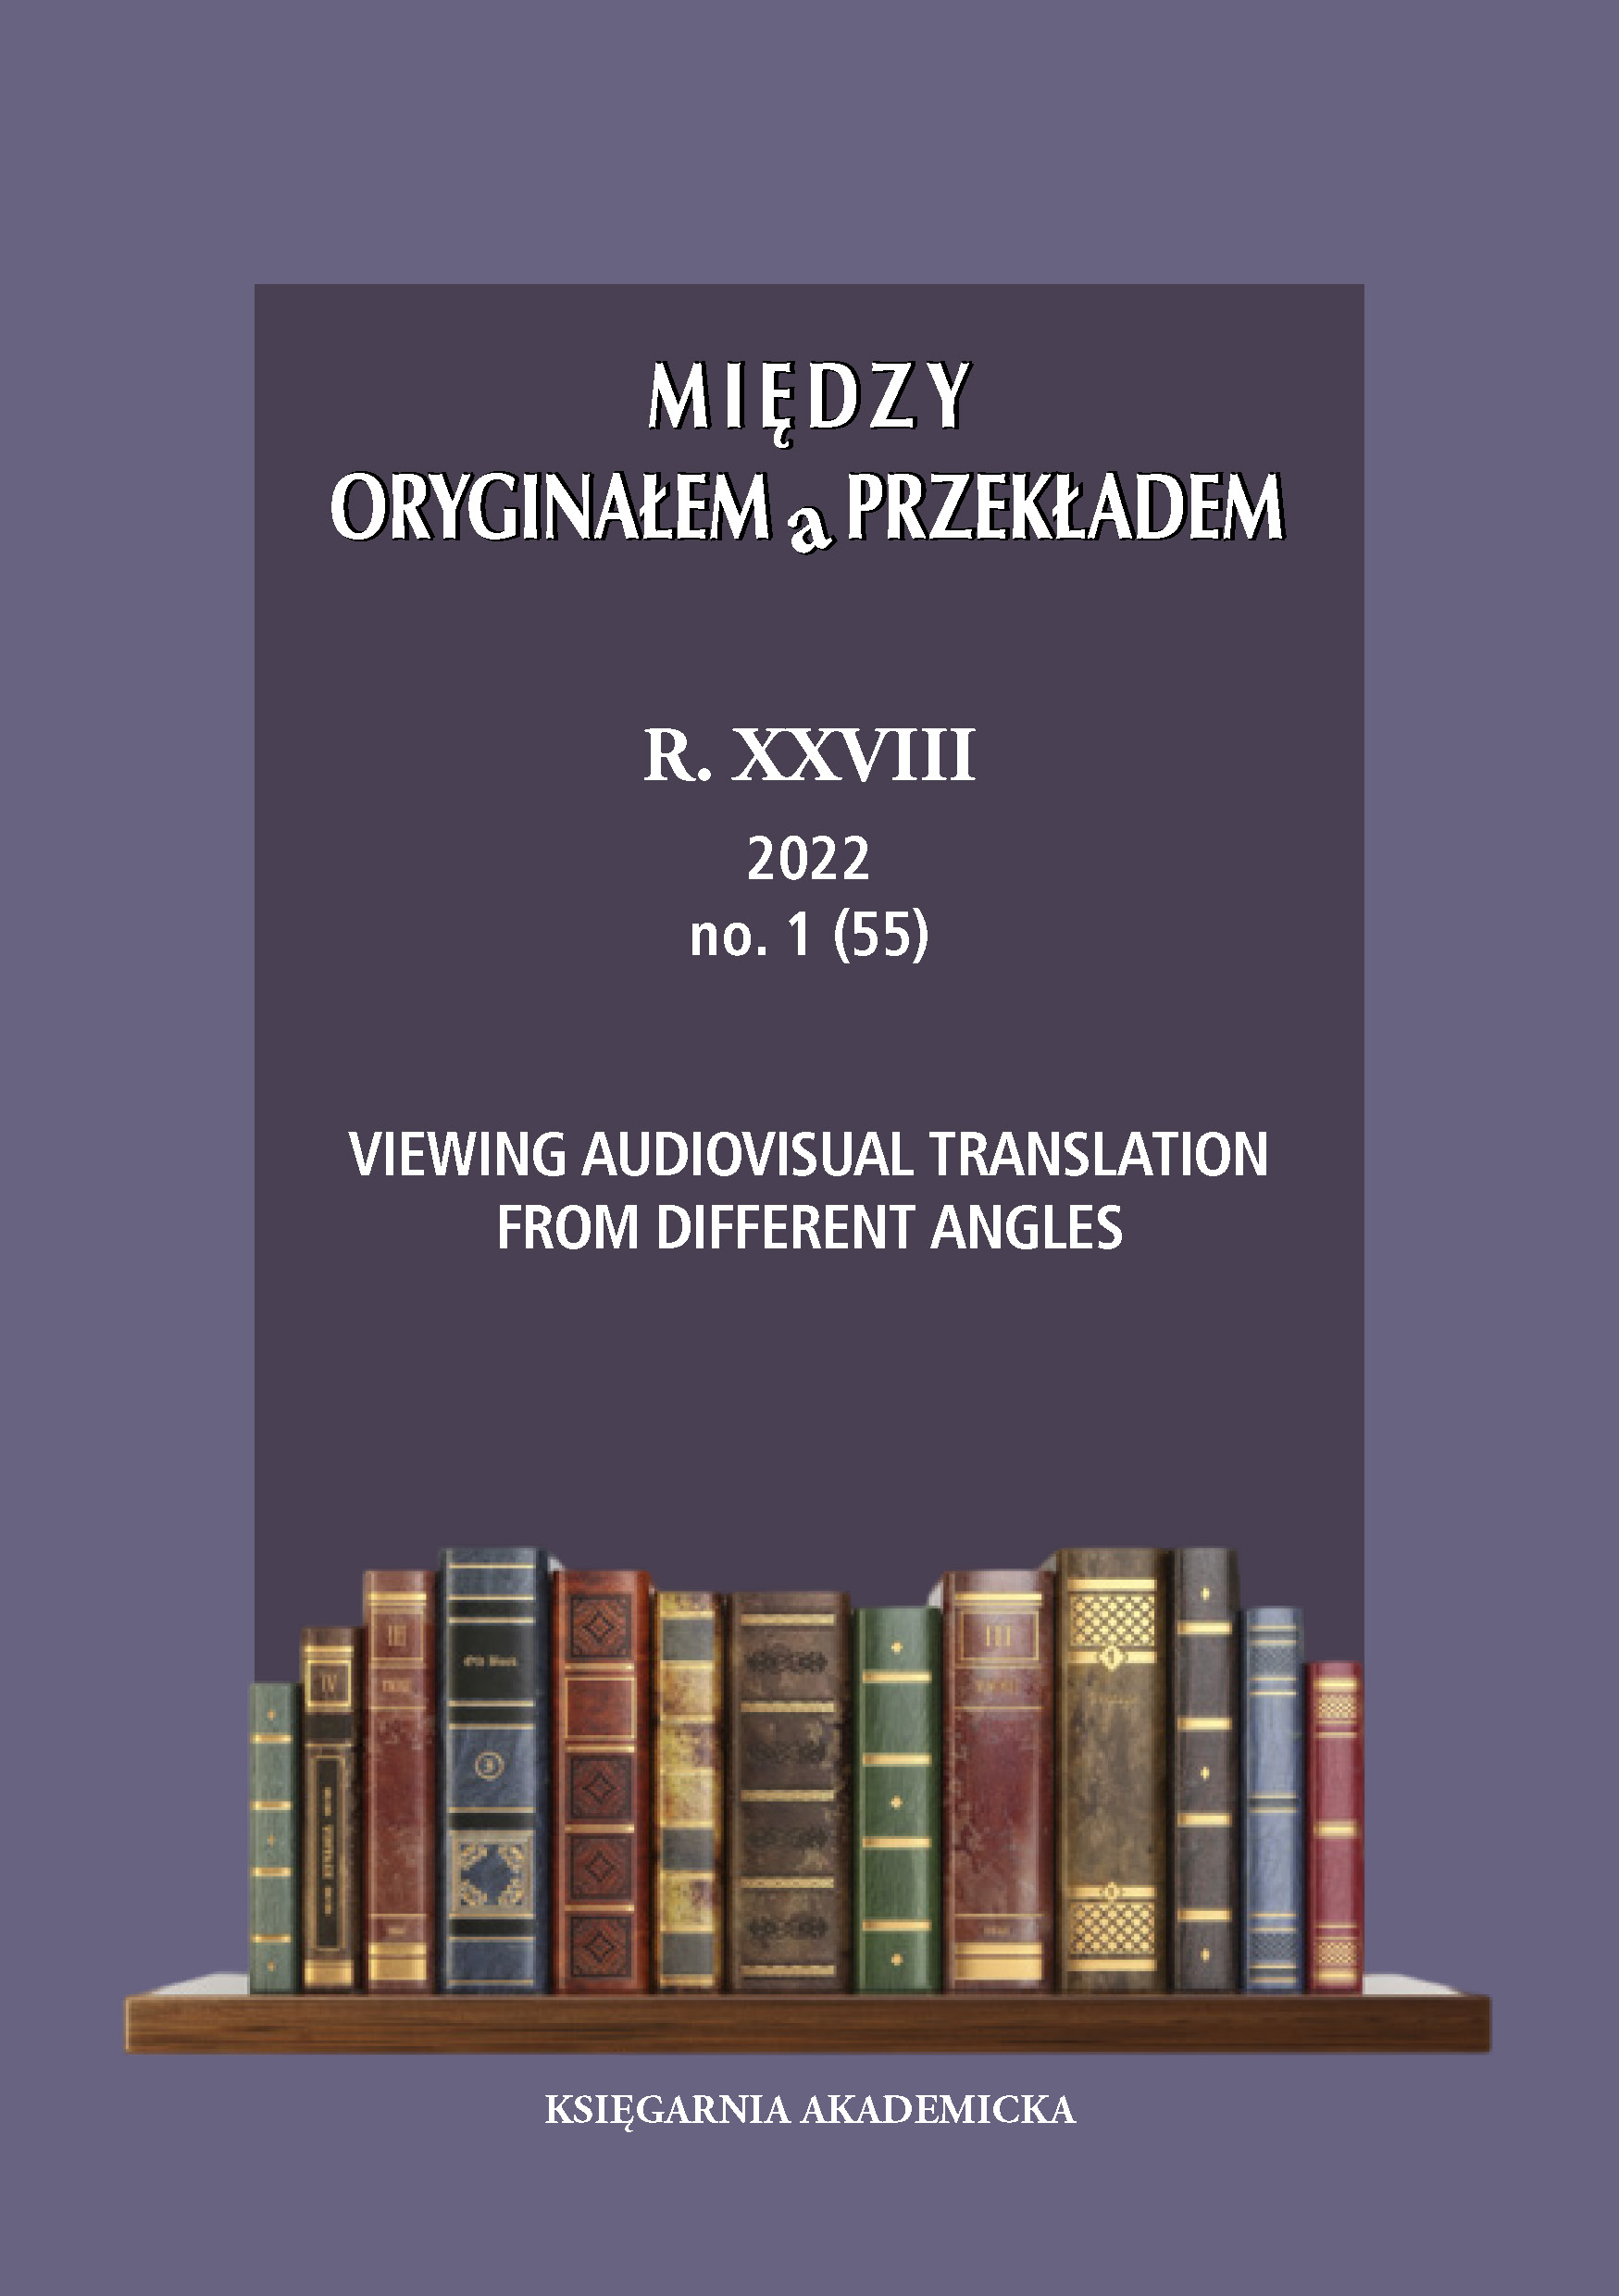 					View Vol. 28 No. 1 (55) (2022): Viewing Audiovisual Translation From Different Angles
				